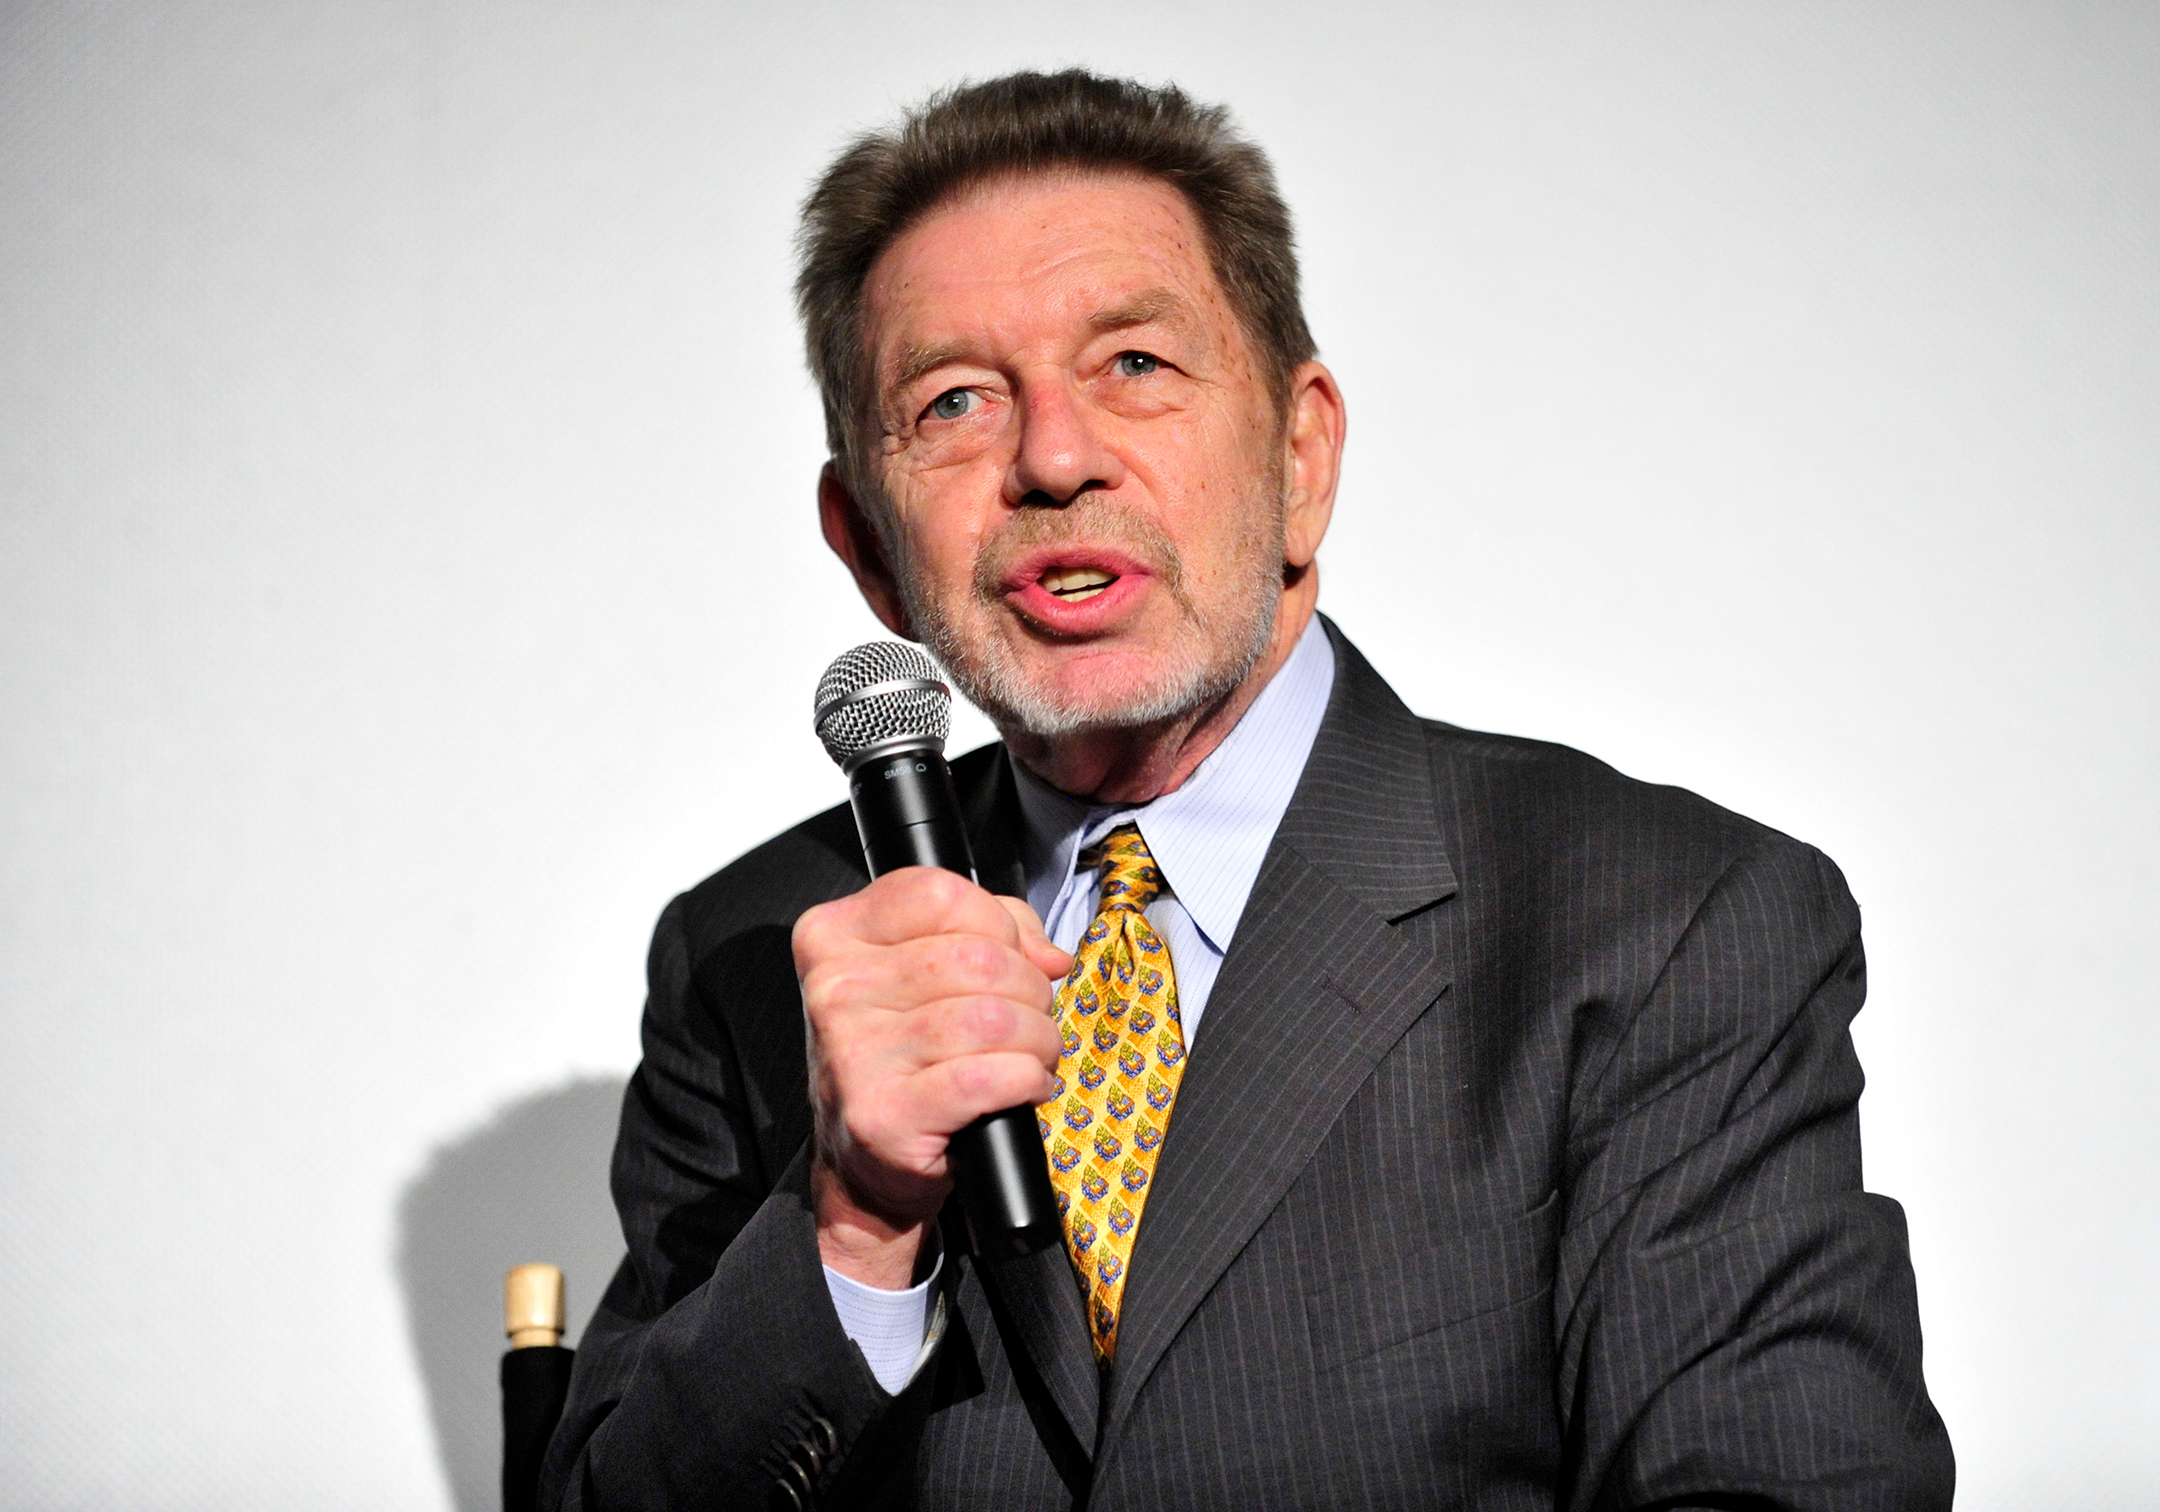 pete hamill holds a microphone as he speaks at a movie premiere